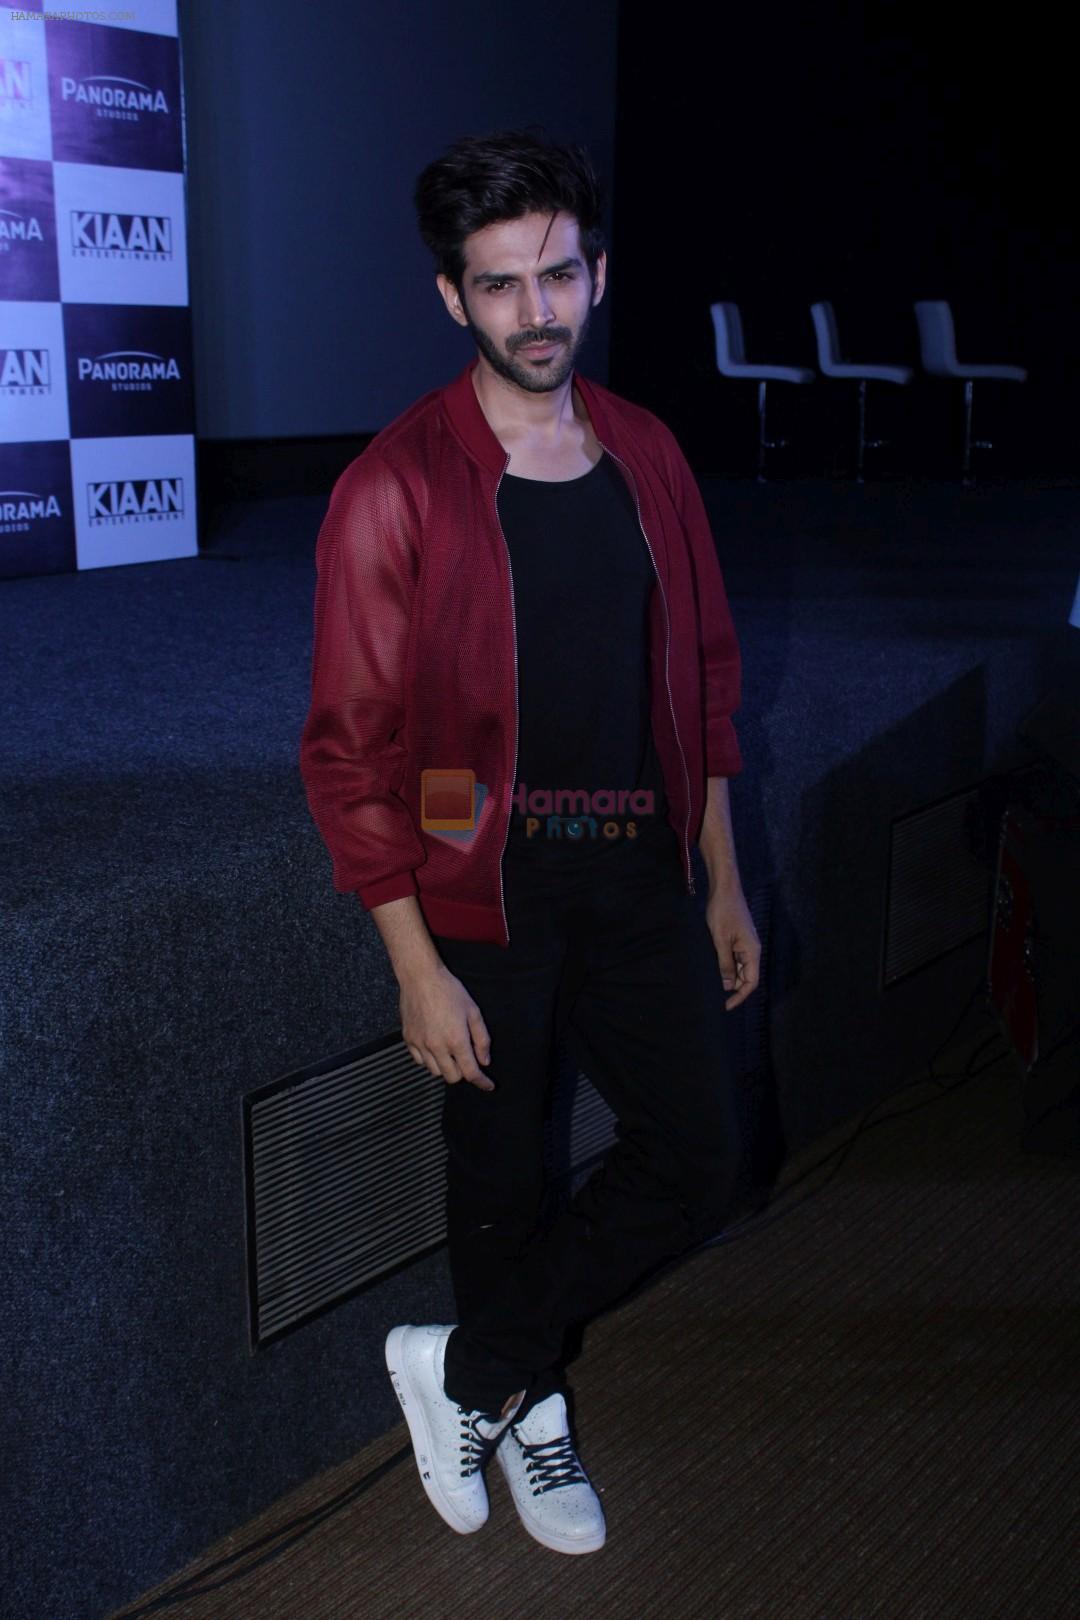 Kartik Aaryan at the Press Conference of film Guest Iin London on 3rd July 2017